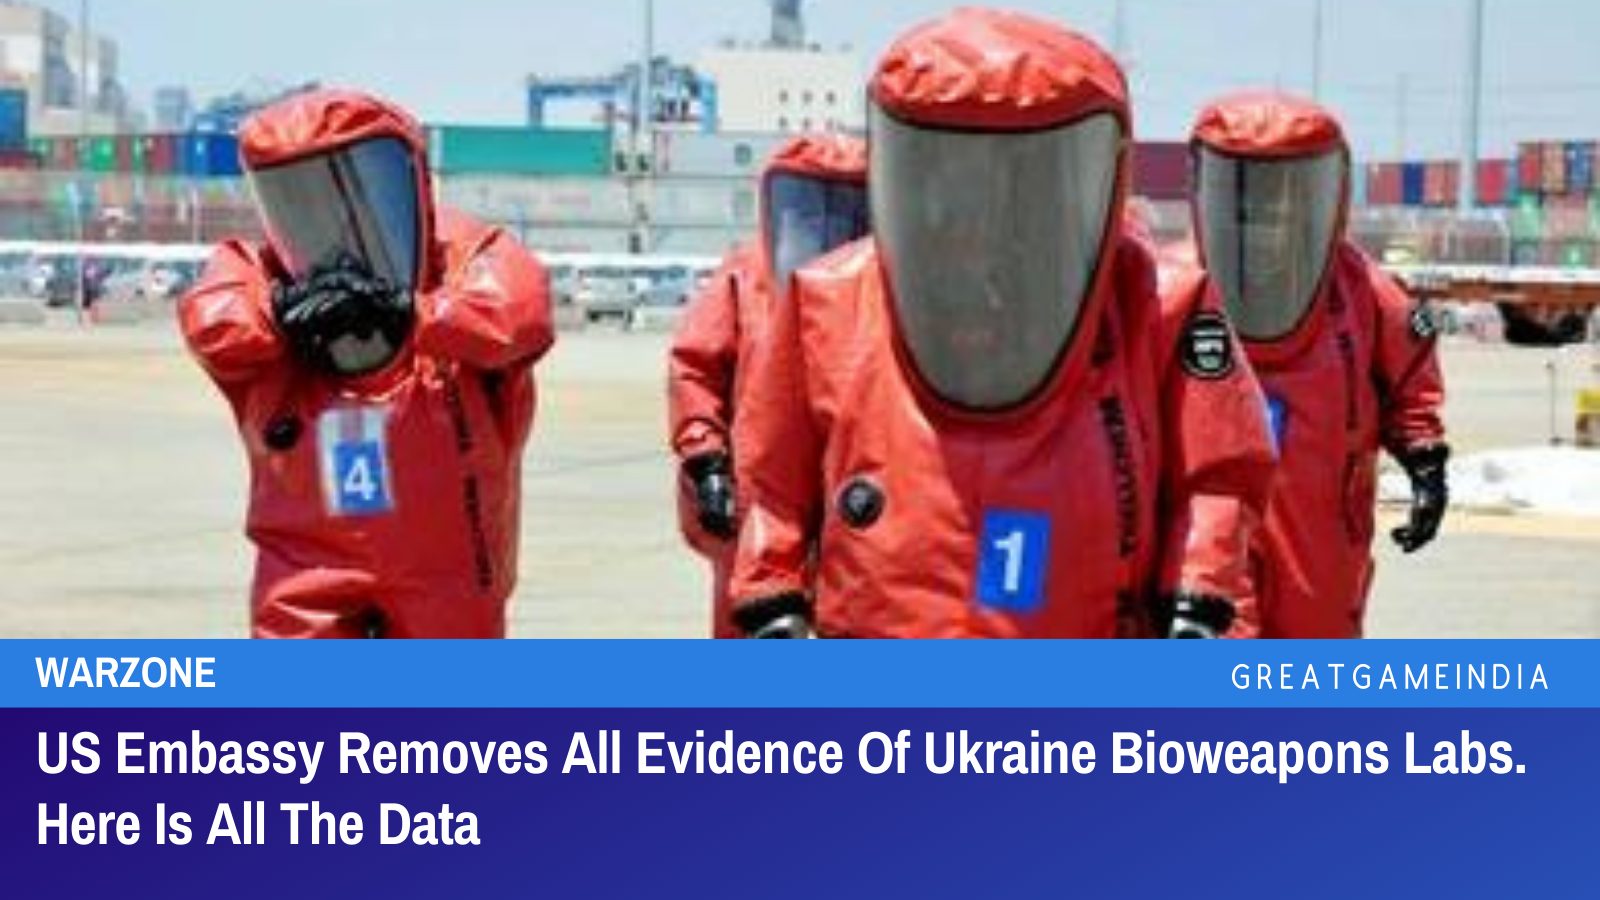 US Embassy Removes All Evidence Of Ukraine Bioweapons Labs. Here Is All The Data - GreatGameIndia